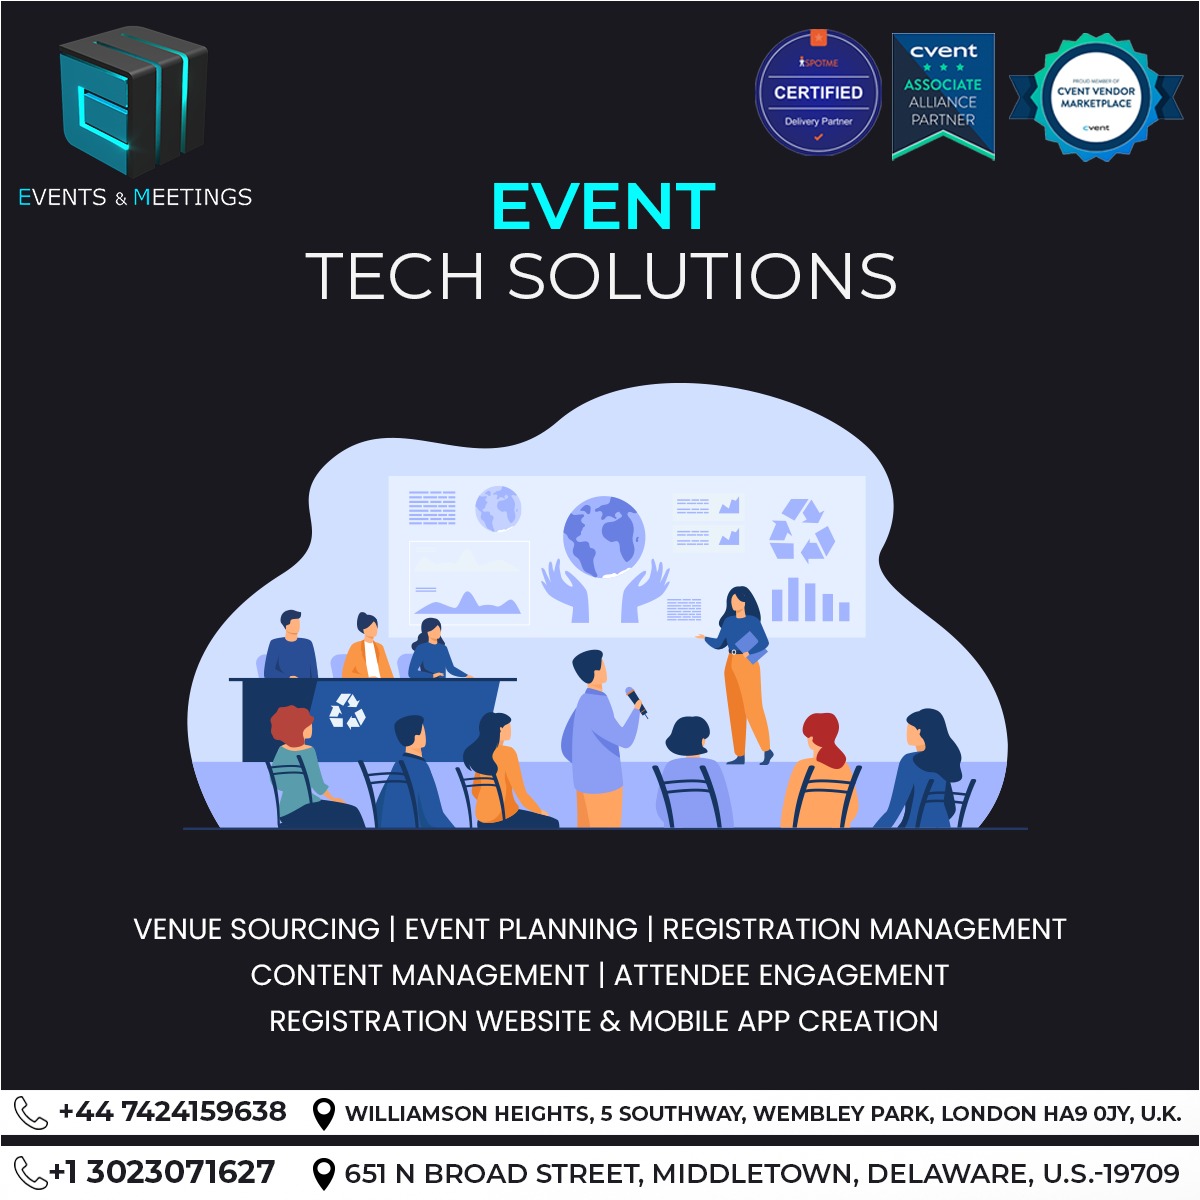 Ensure success, captivate your audience, and stay ahead in the dynamic world of events with Events & Meetings.

eventsandmeetings.co

#TechForEvents #EventInnovation #EventsAndTech #EventTechSolutions #FutureOfEvents #cvent #spotme #eventtechsolutions #eventsandmeetings